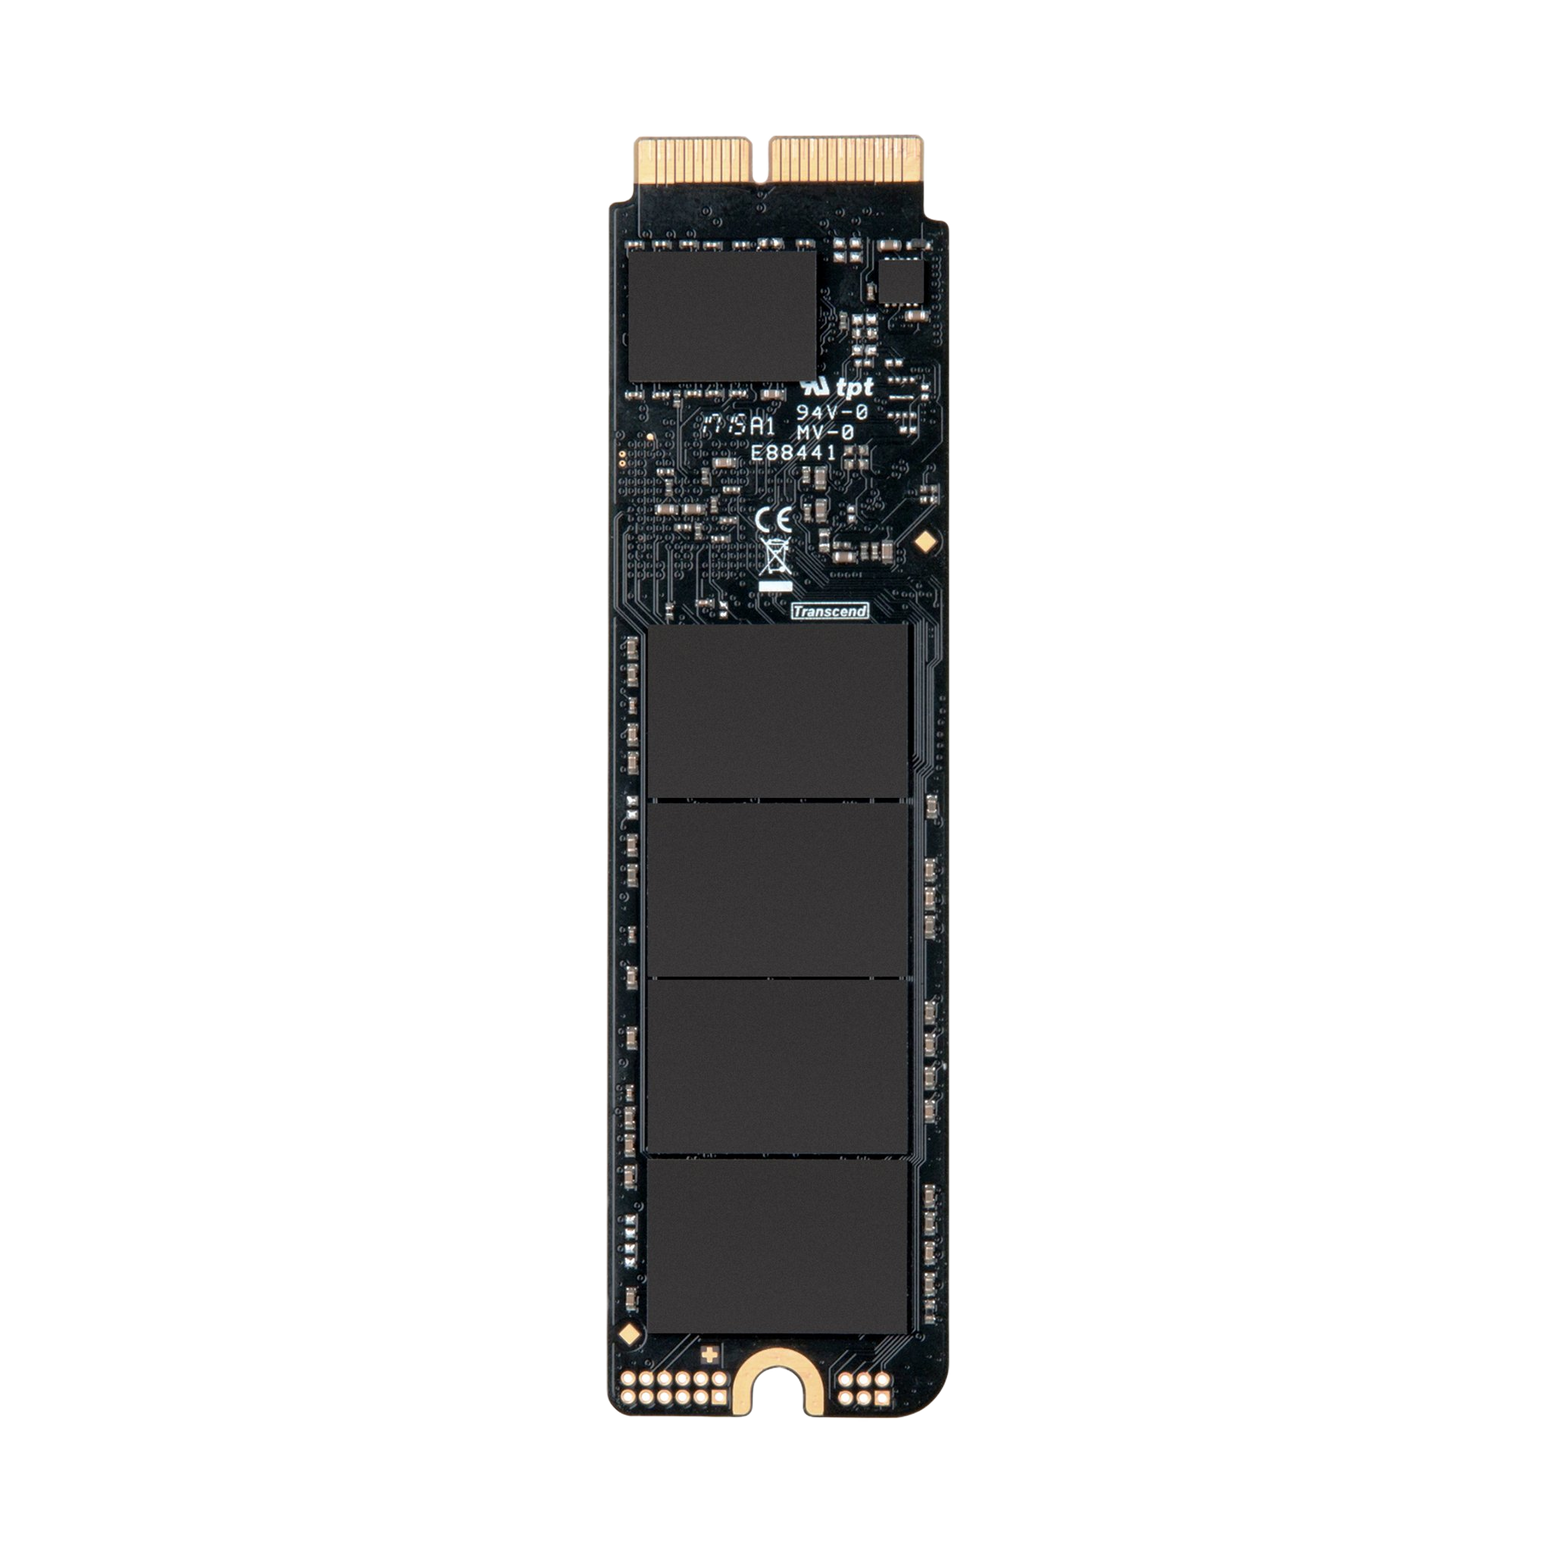 Transcend 240GB Jet Drive 820 SSD Only for MacBook Pro (Late 2013 - Early 2015), MacBook Air (Mid 2013 - Early 2015), Mac mini (Late 2014), Mac Pro (Late 2013) - AHCI Gen3 x2